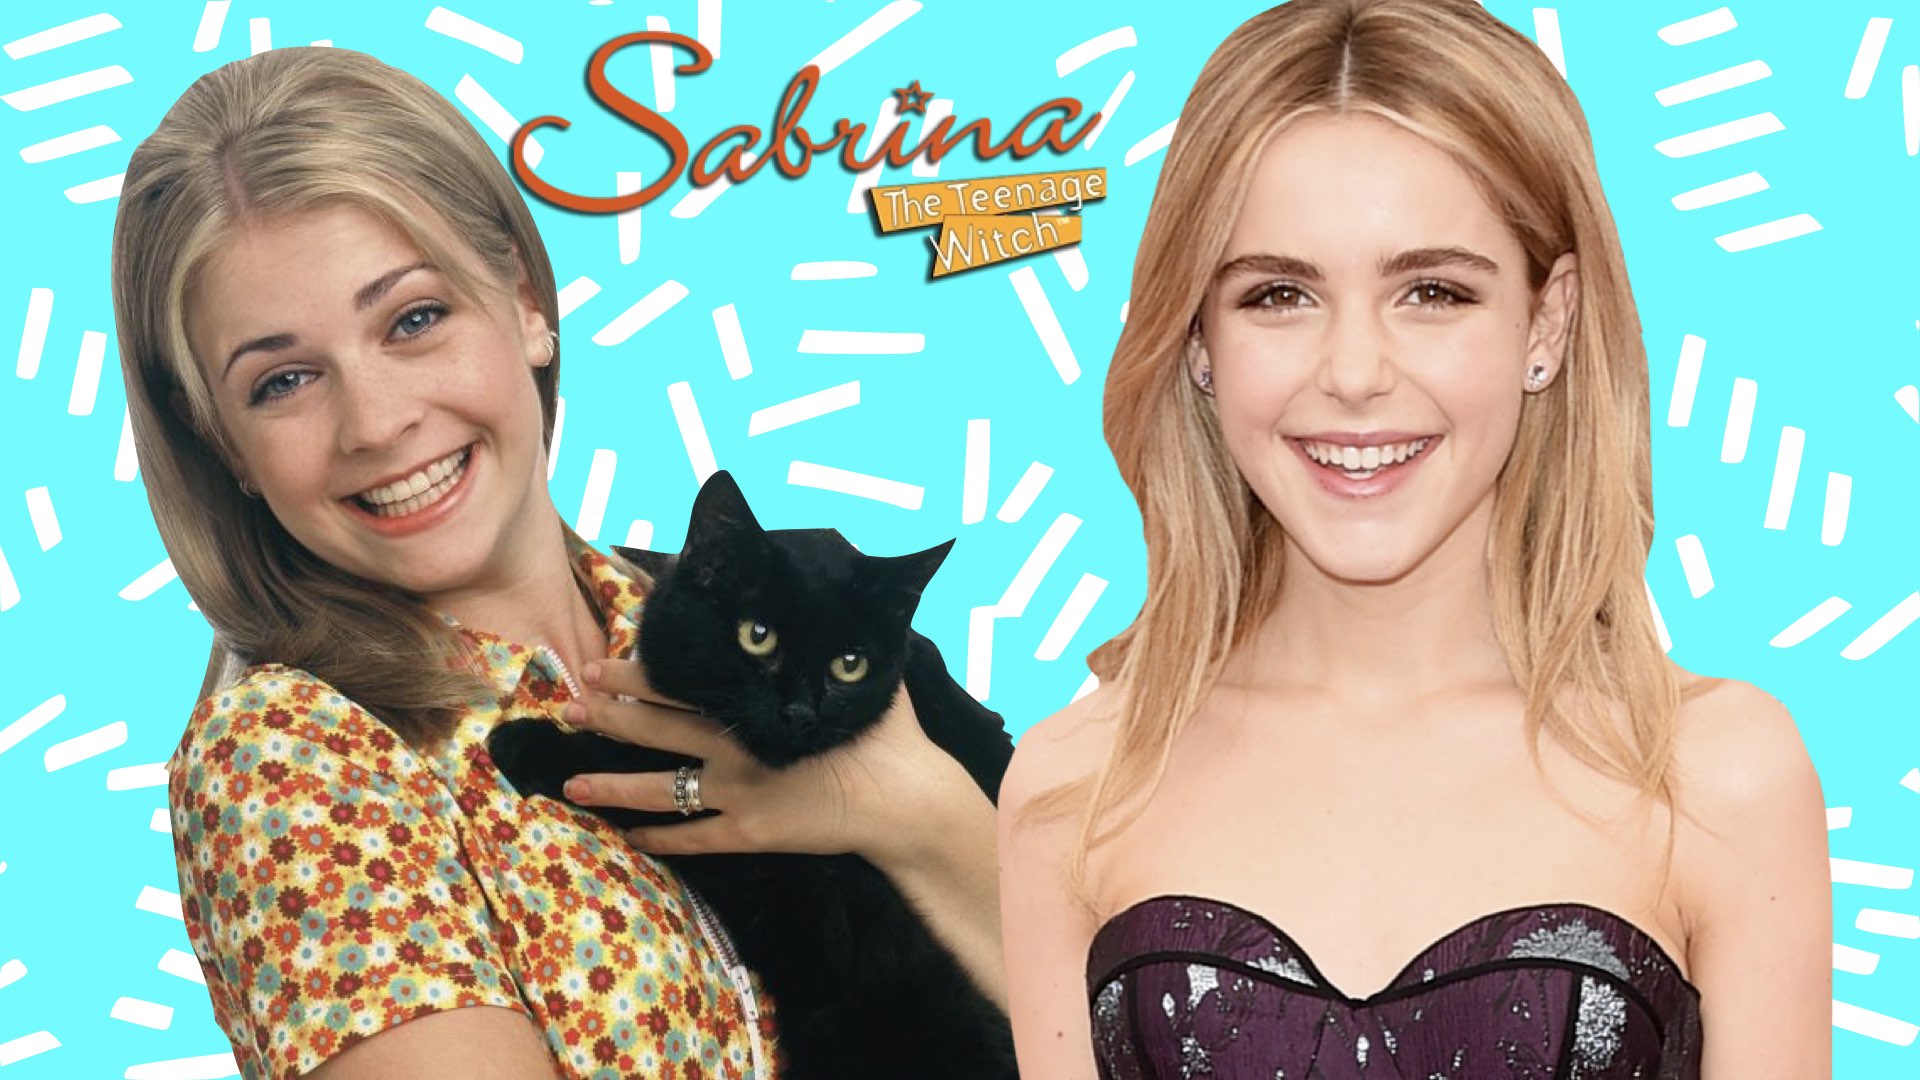 Heres The First Pics Of The Sabrina The Teenage Witch Reboot